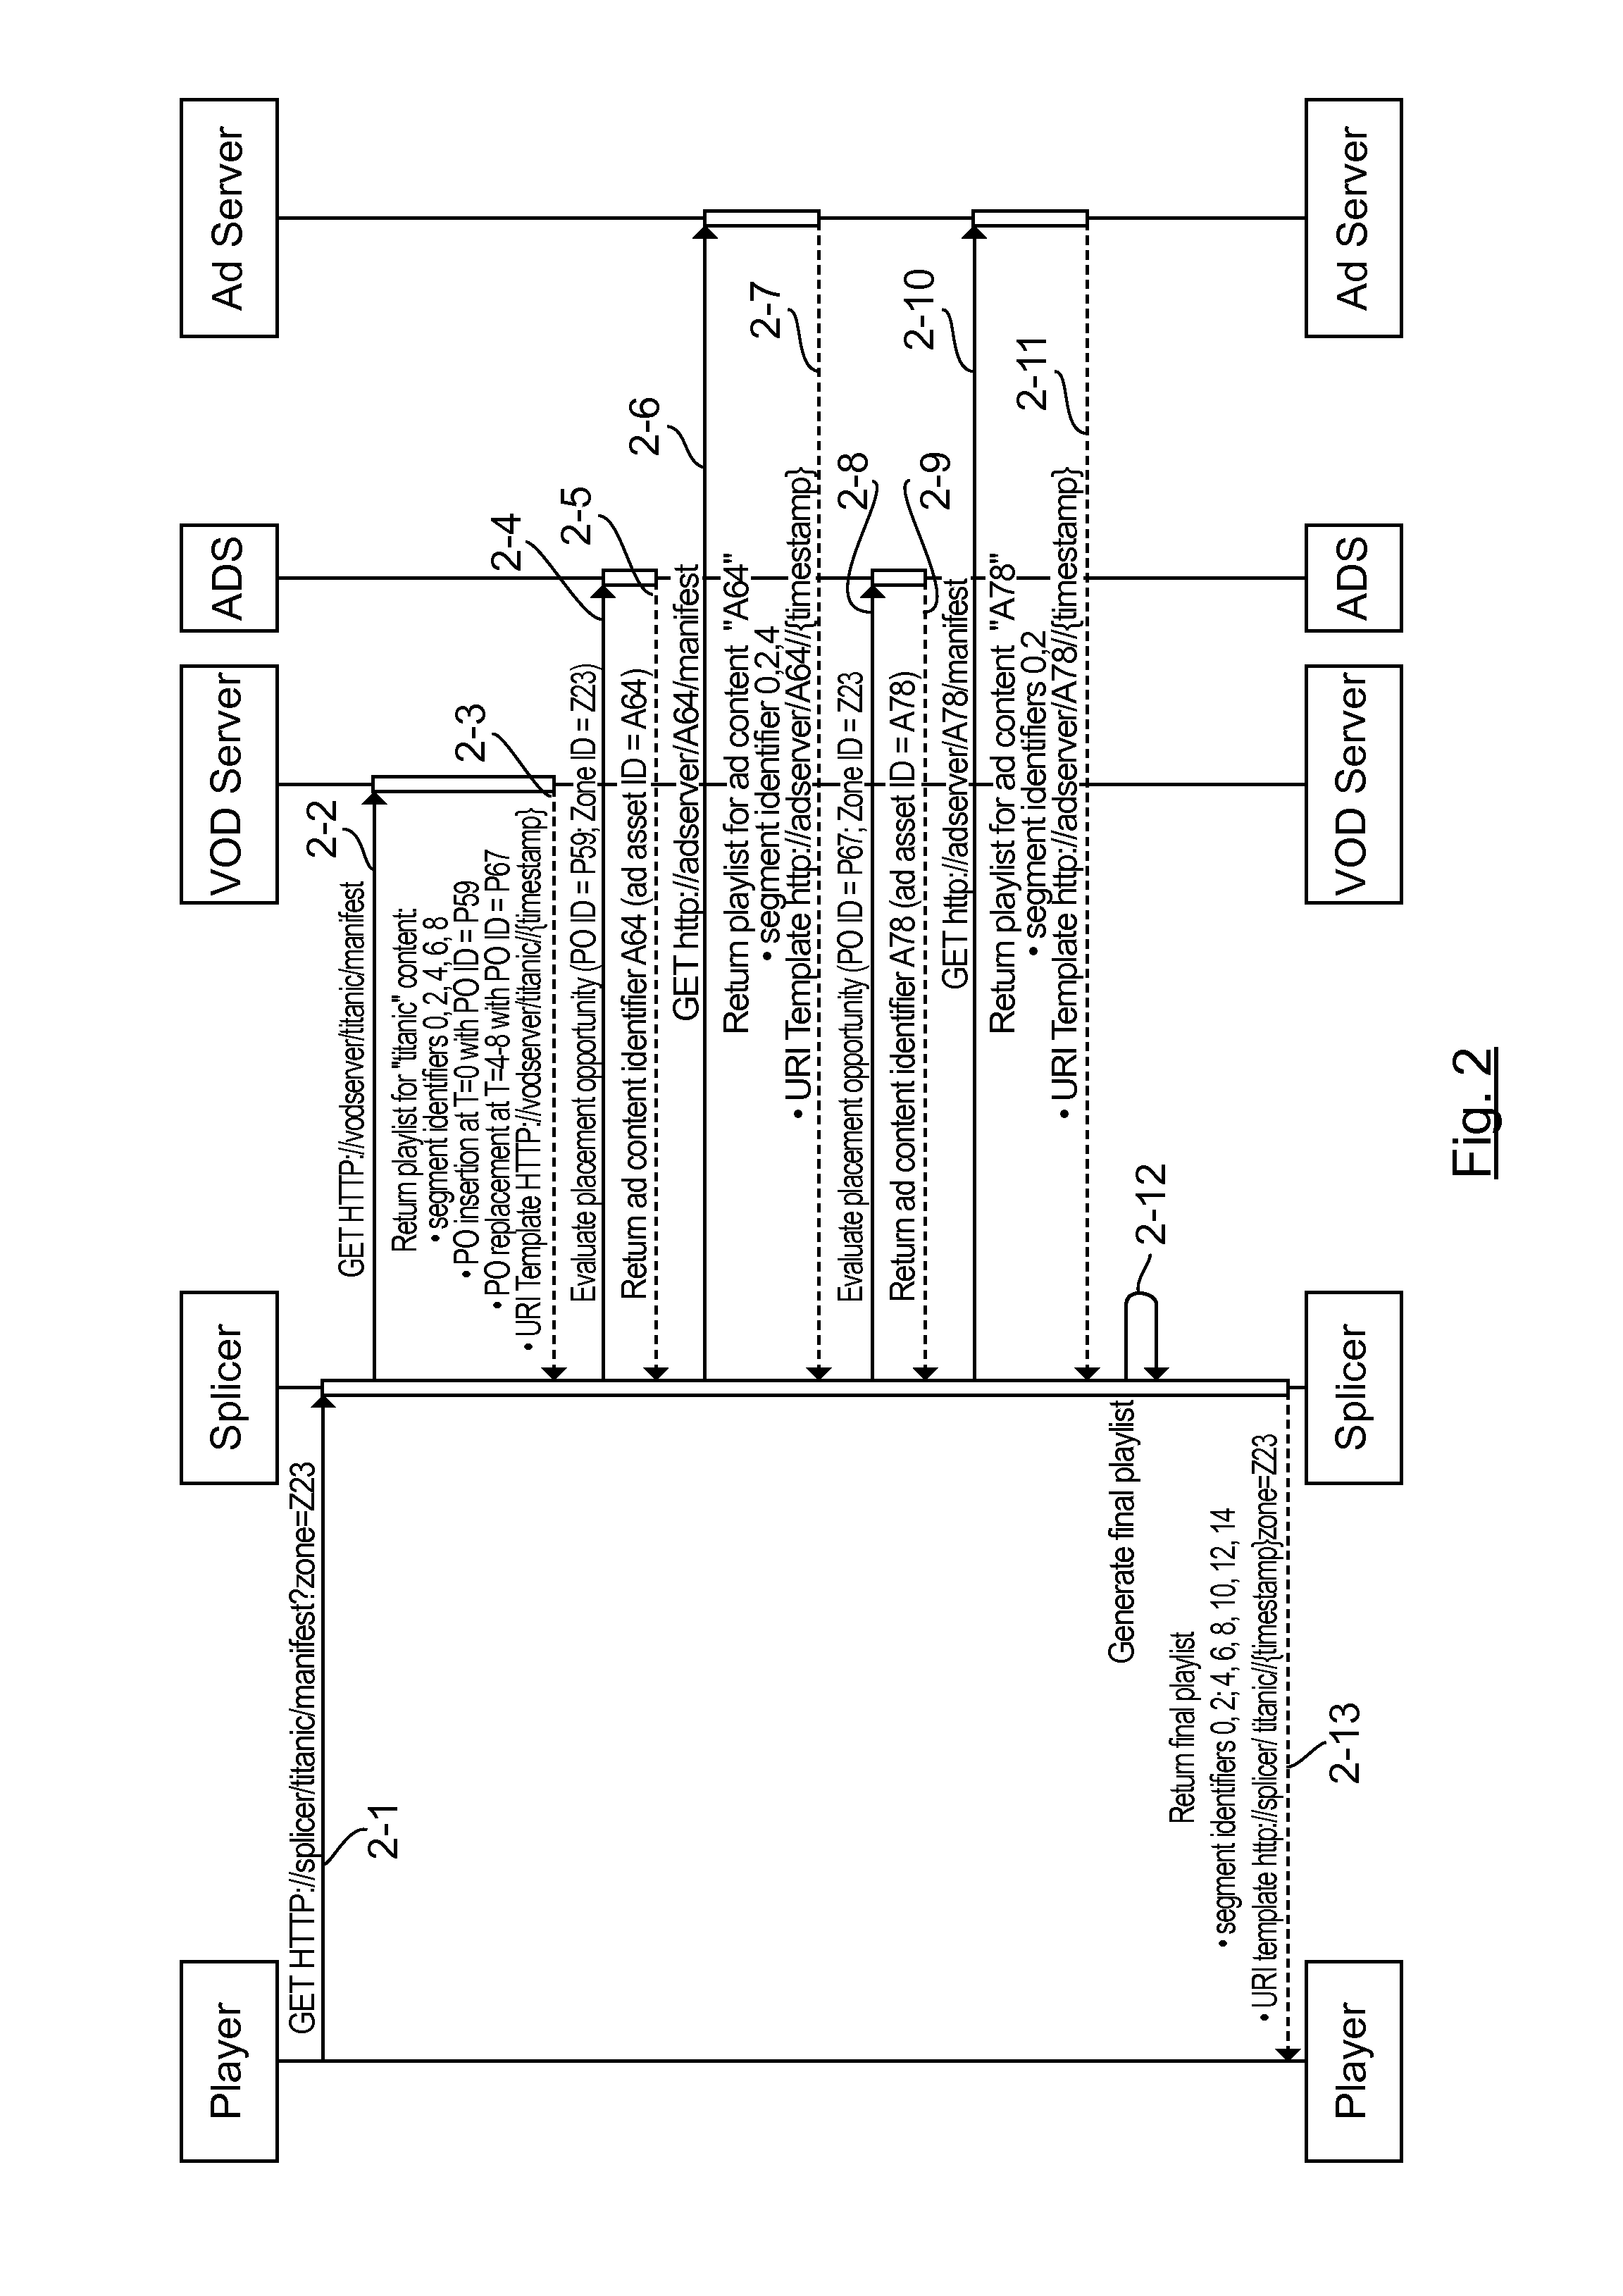 Method for managing personalized playing lists of the type comprising a URL template and a list of segment identifiers